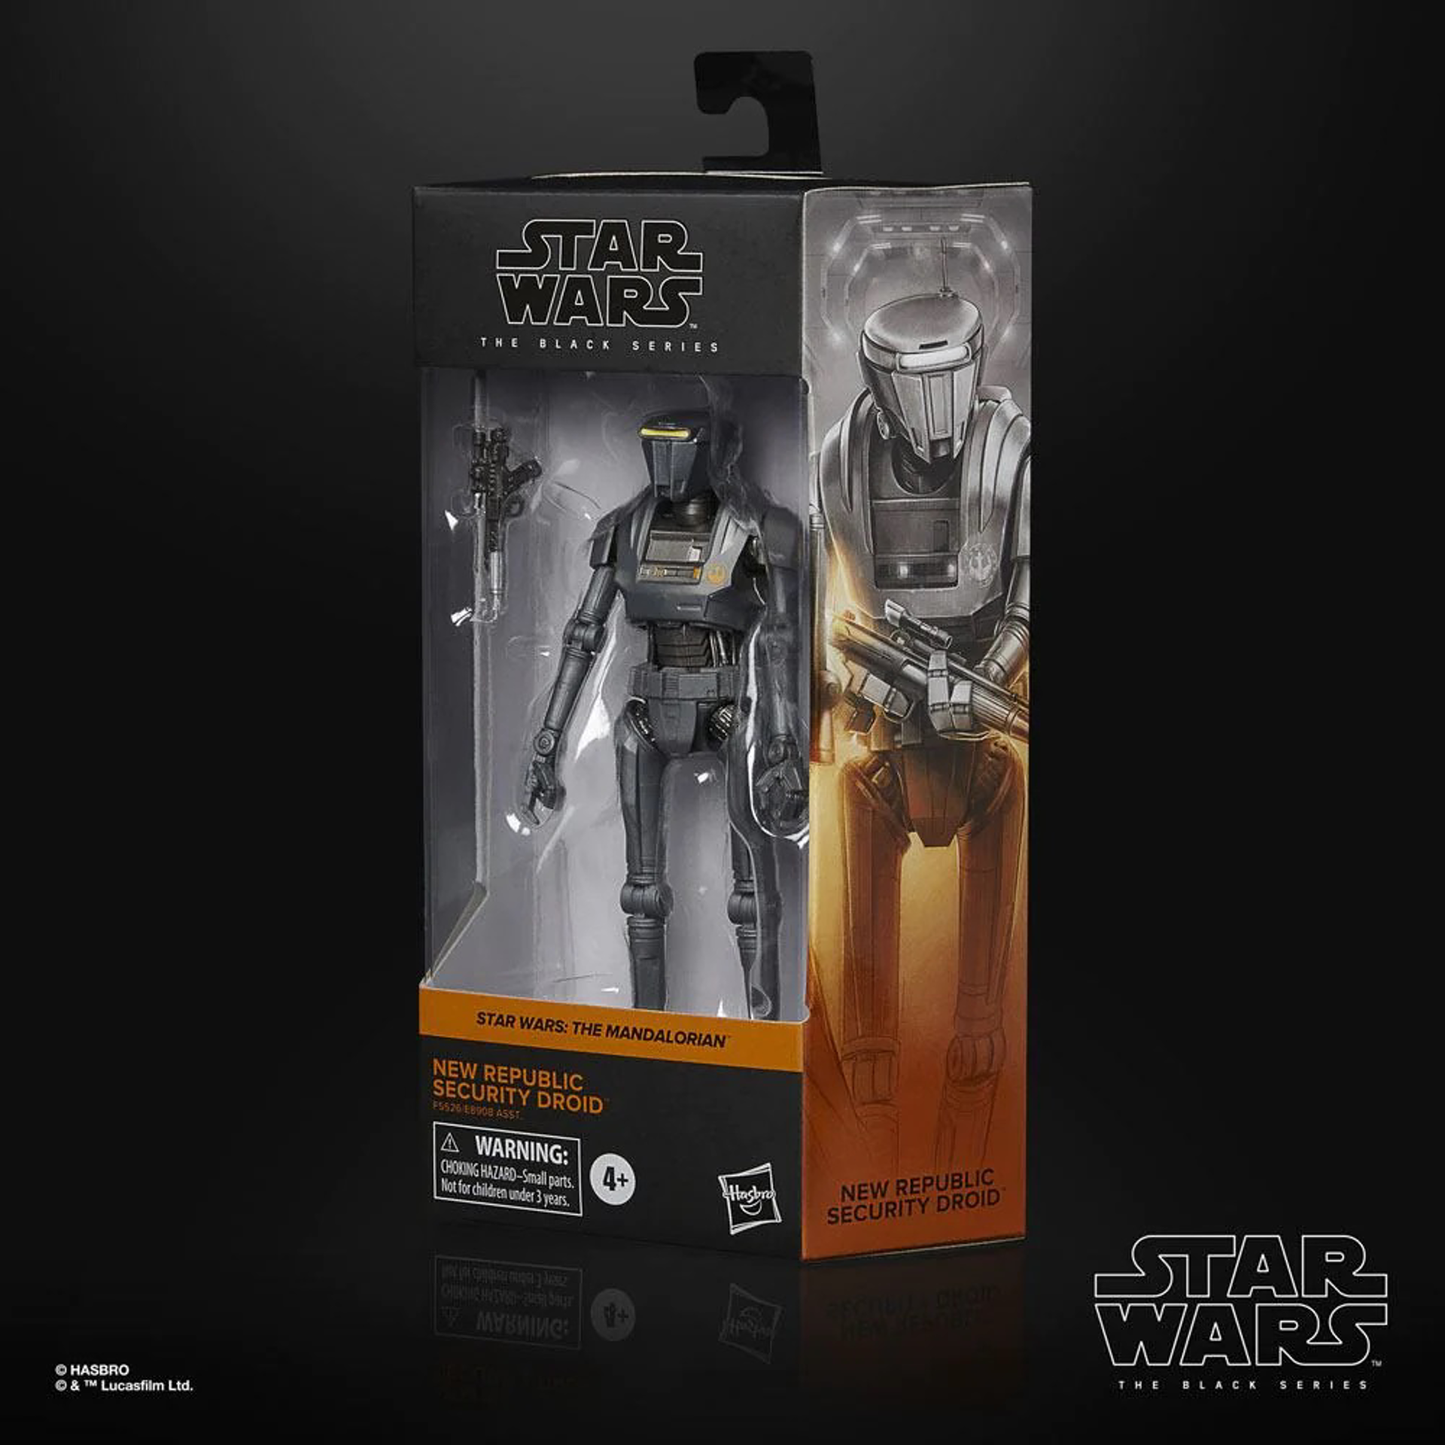 Star Wars The Black Series - New Republic Security Droid Action Figure 15cm